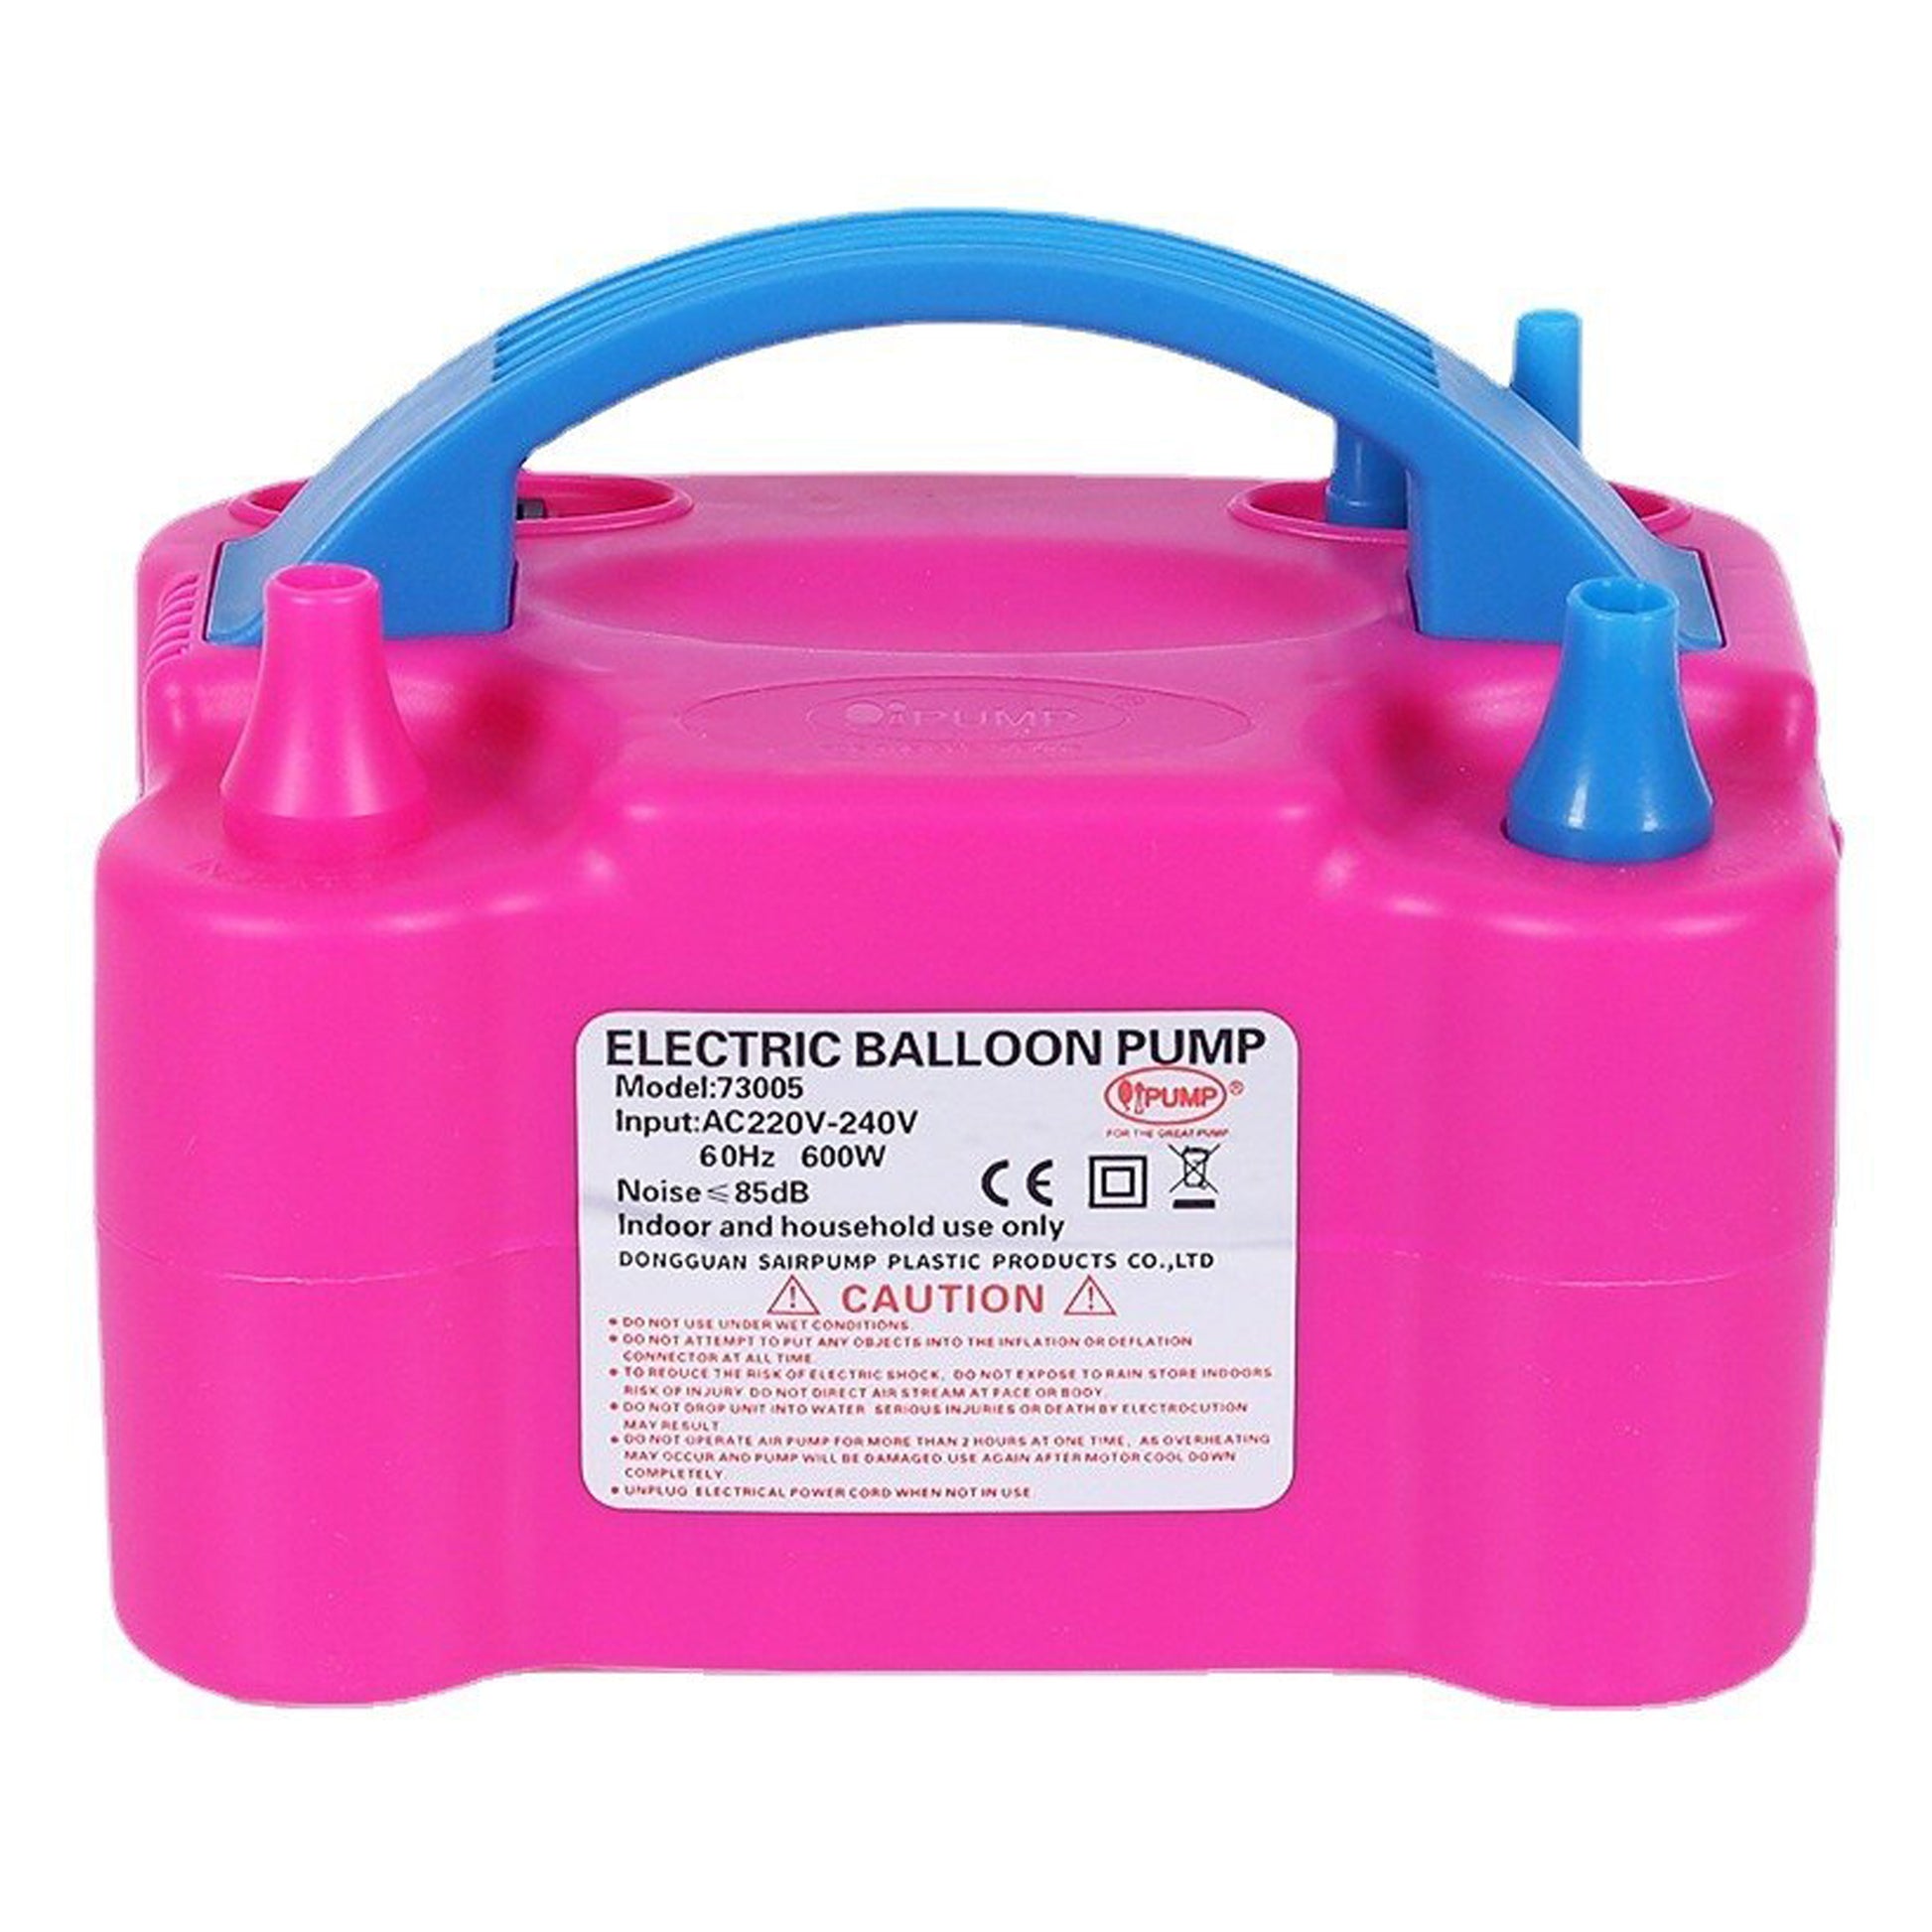 Electric Balloon Inflator Hire in Cairns from Rent Some Fun